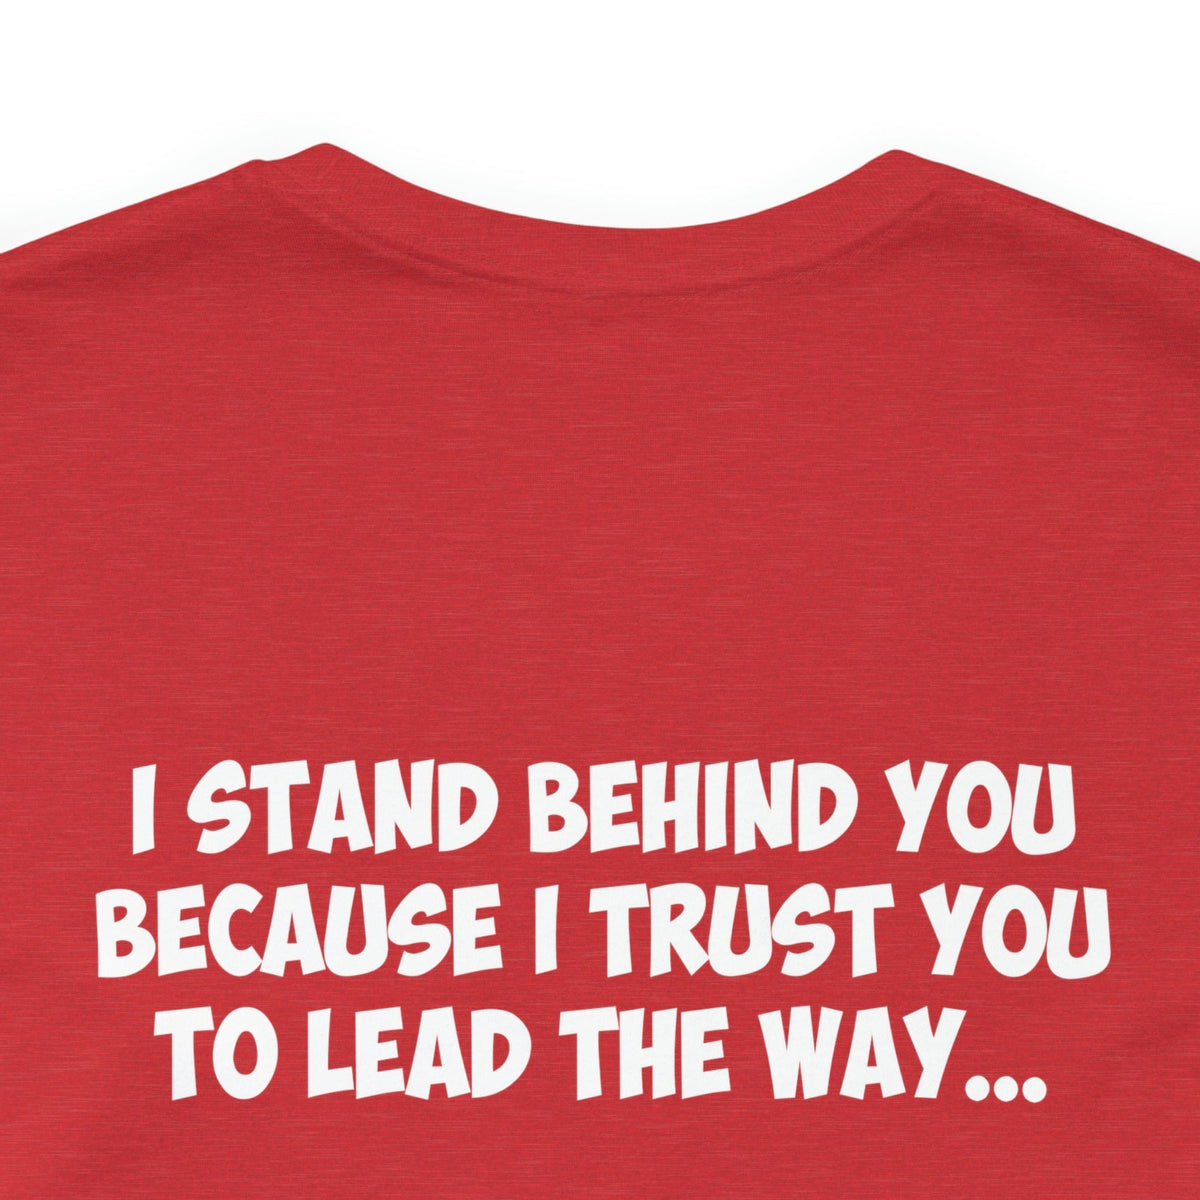 I Stand Behind You Because I Trust You To Lead The Way...